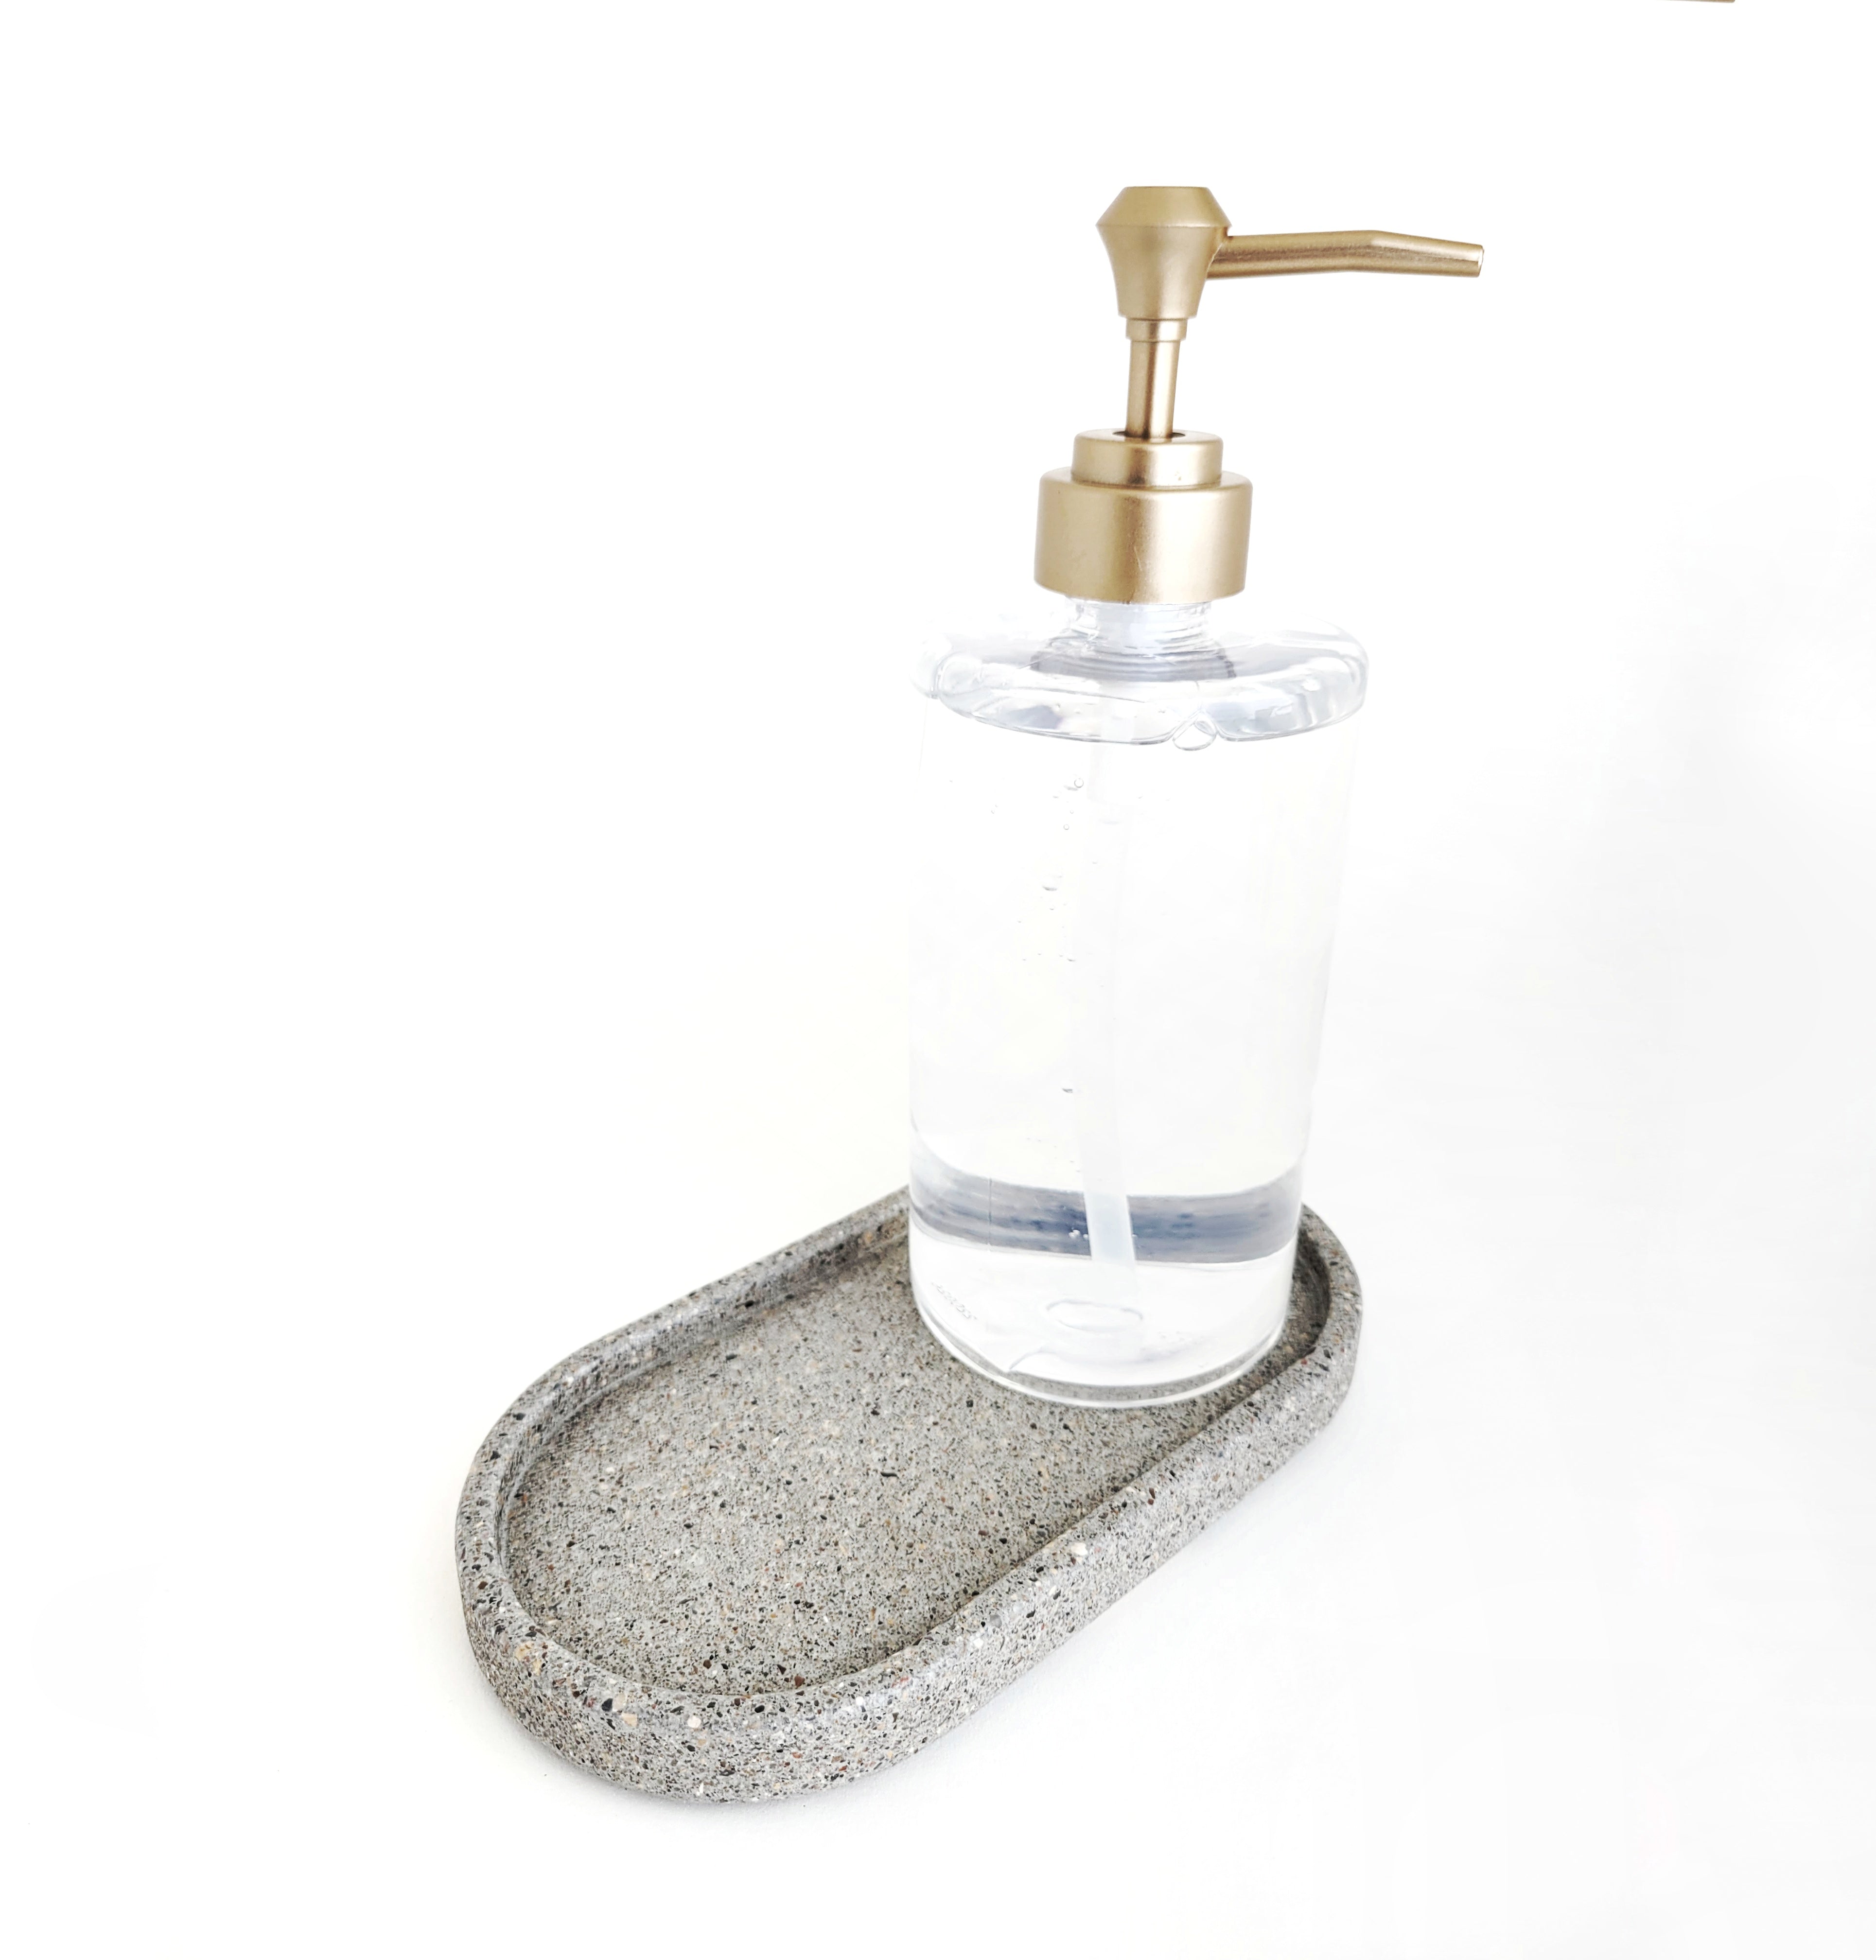 Grey Sandstone Soap Dispenser Tray with Clear Round Soap DispGrey Sandstone Soap Dispenser Tray with Clear Round Soap Dispenser - Elegant Bathroom Accessory